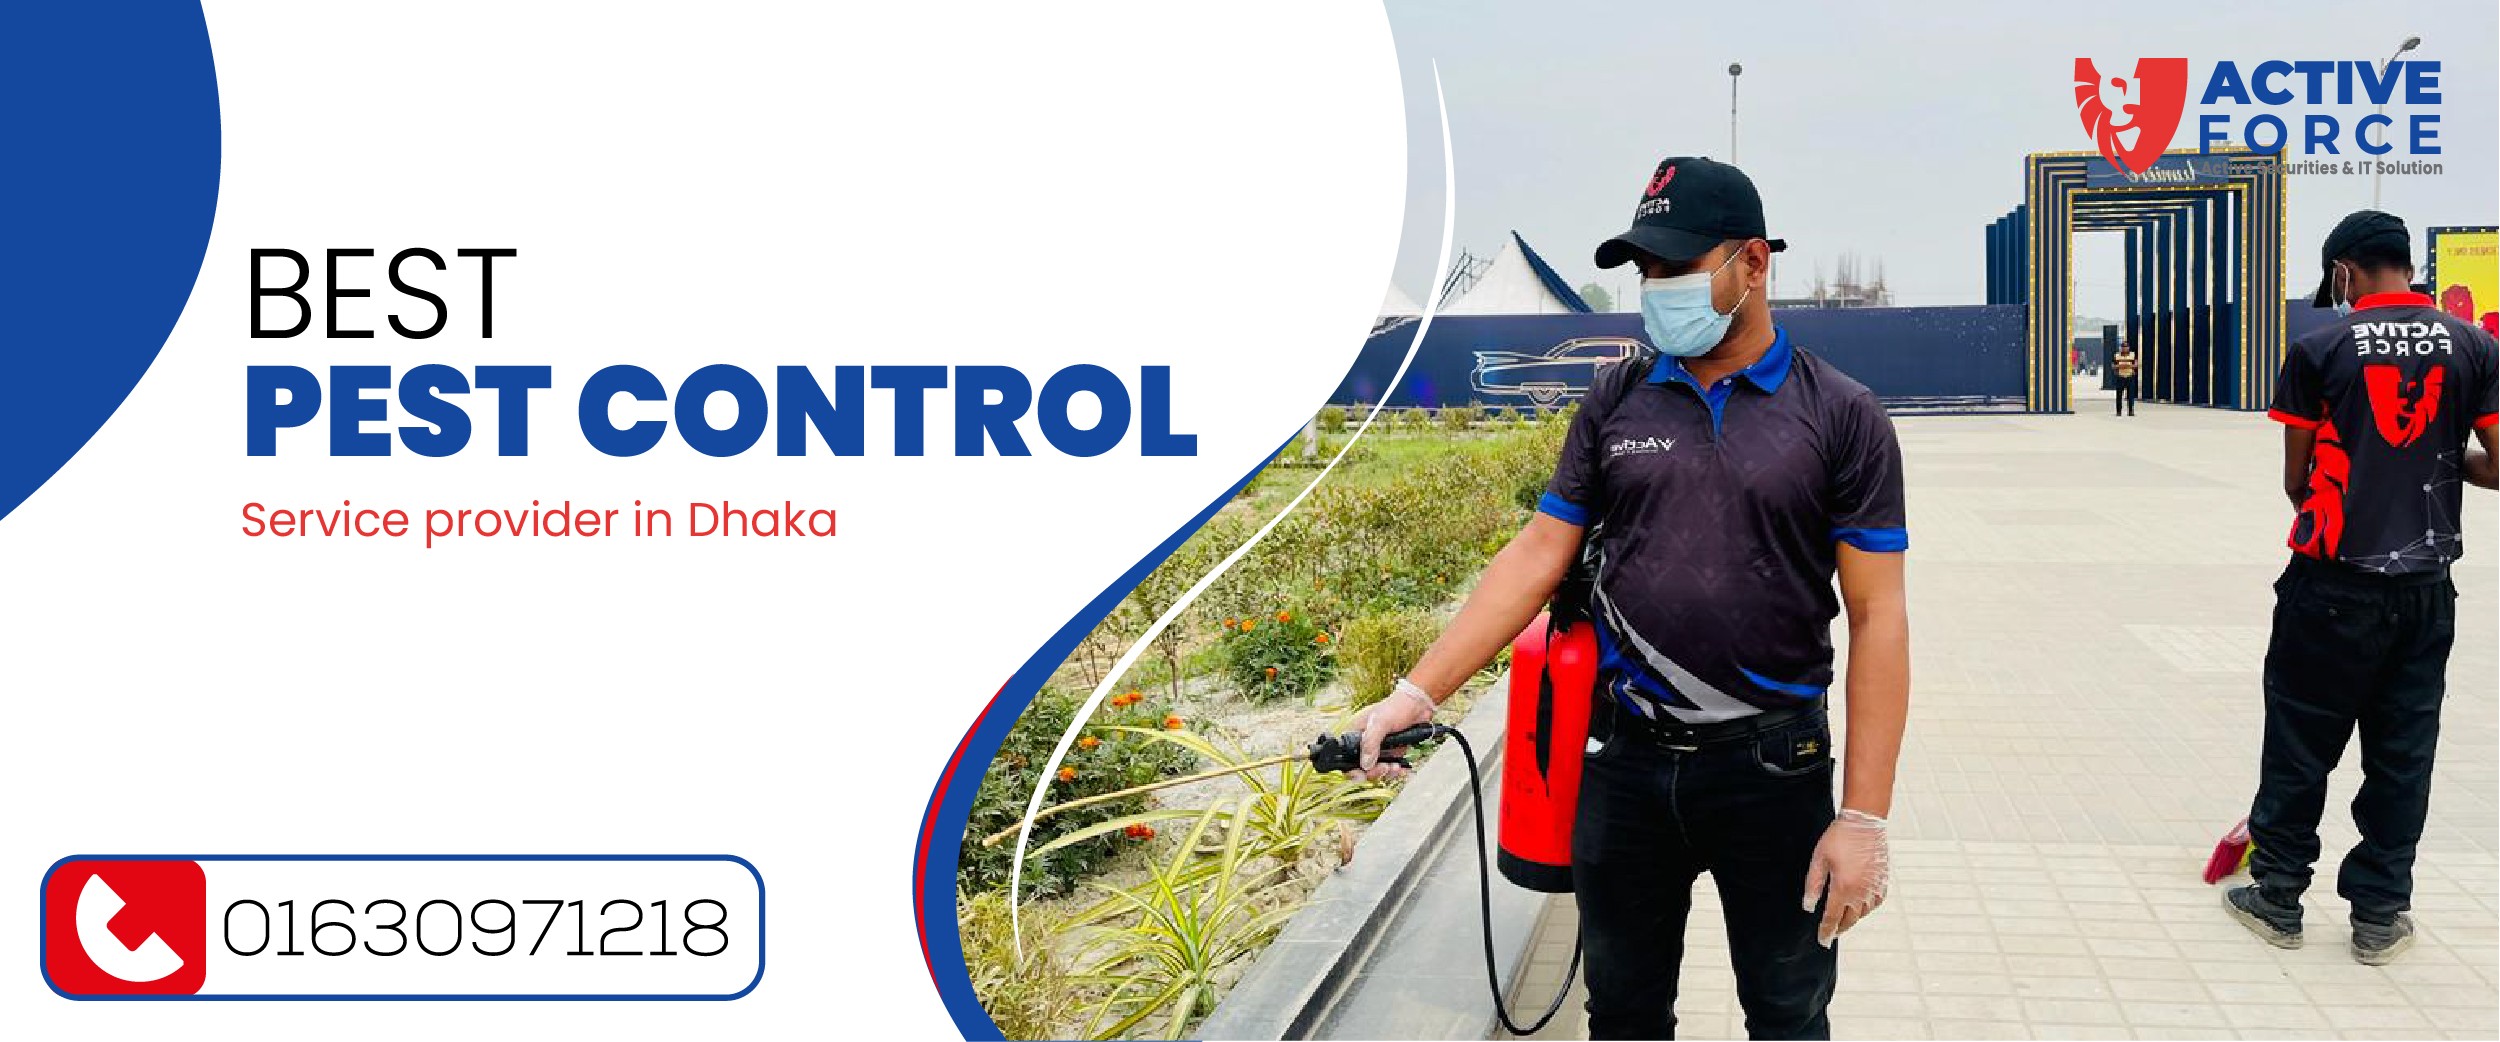 best pest control service provider in dhaka | Active Force